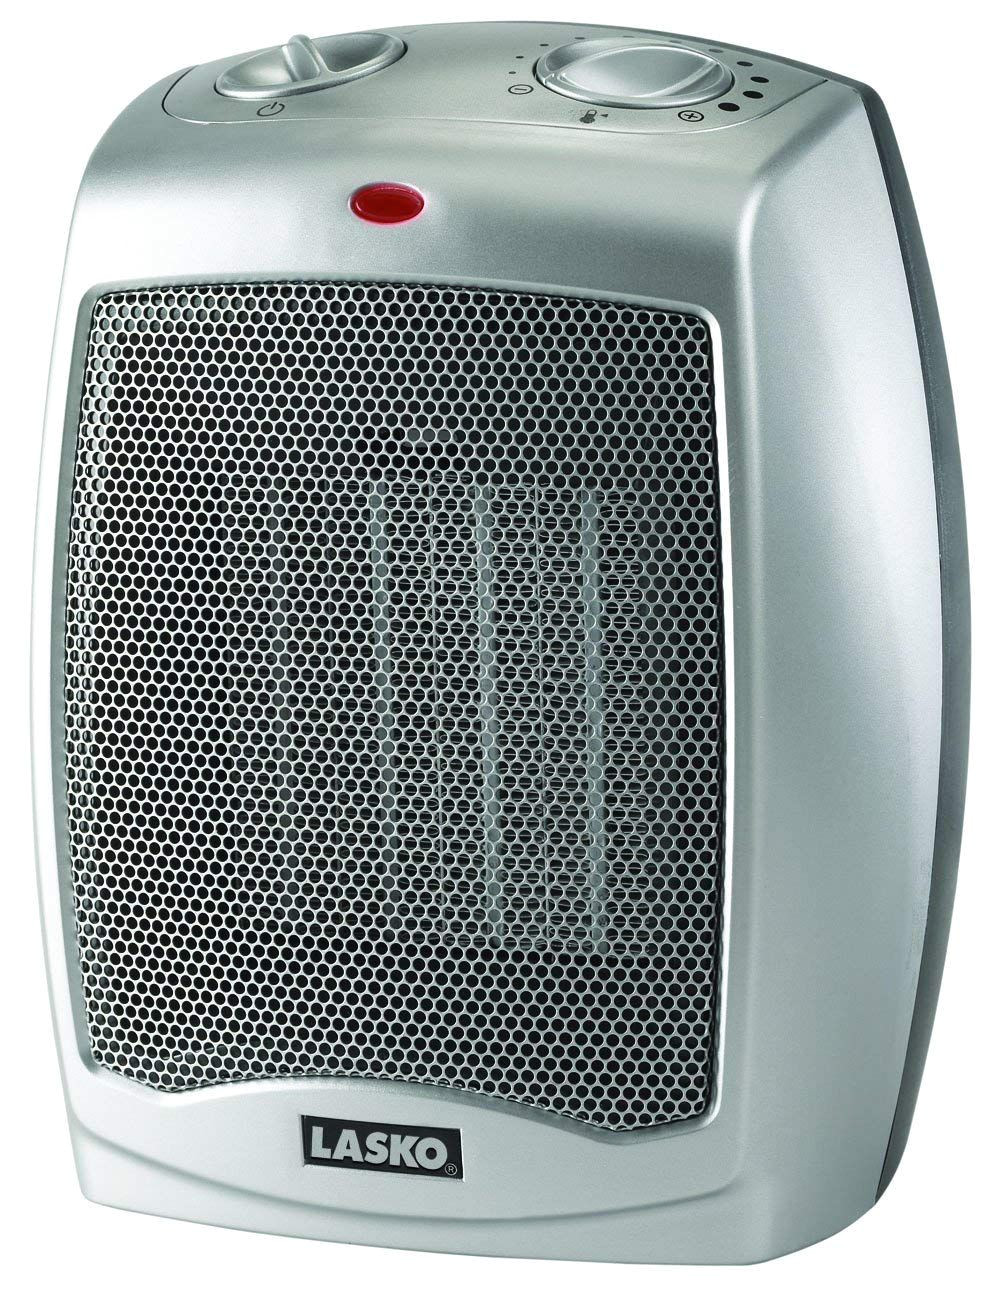 Best Indoor Space Heaters for Large Rooms the 9 Best Space Heaters to Buy In 2019